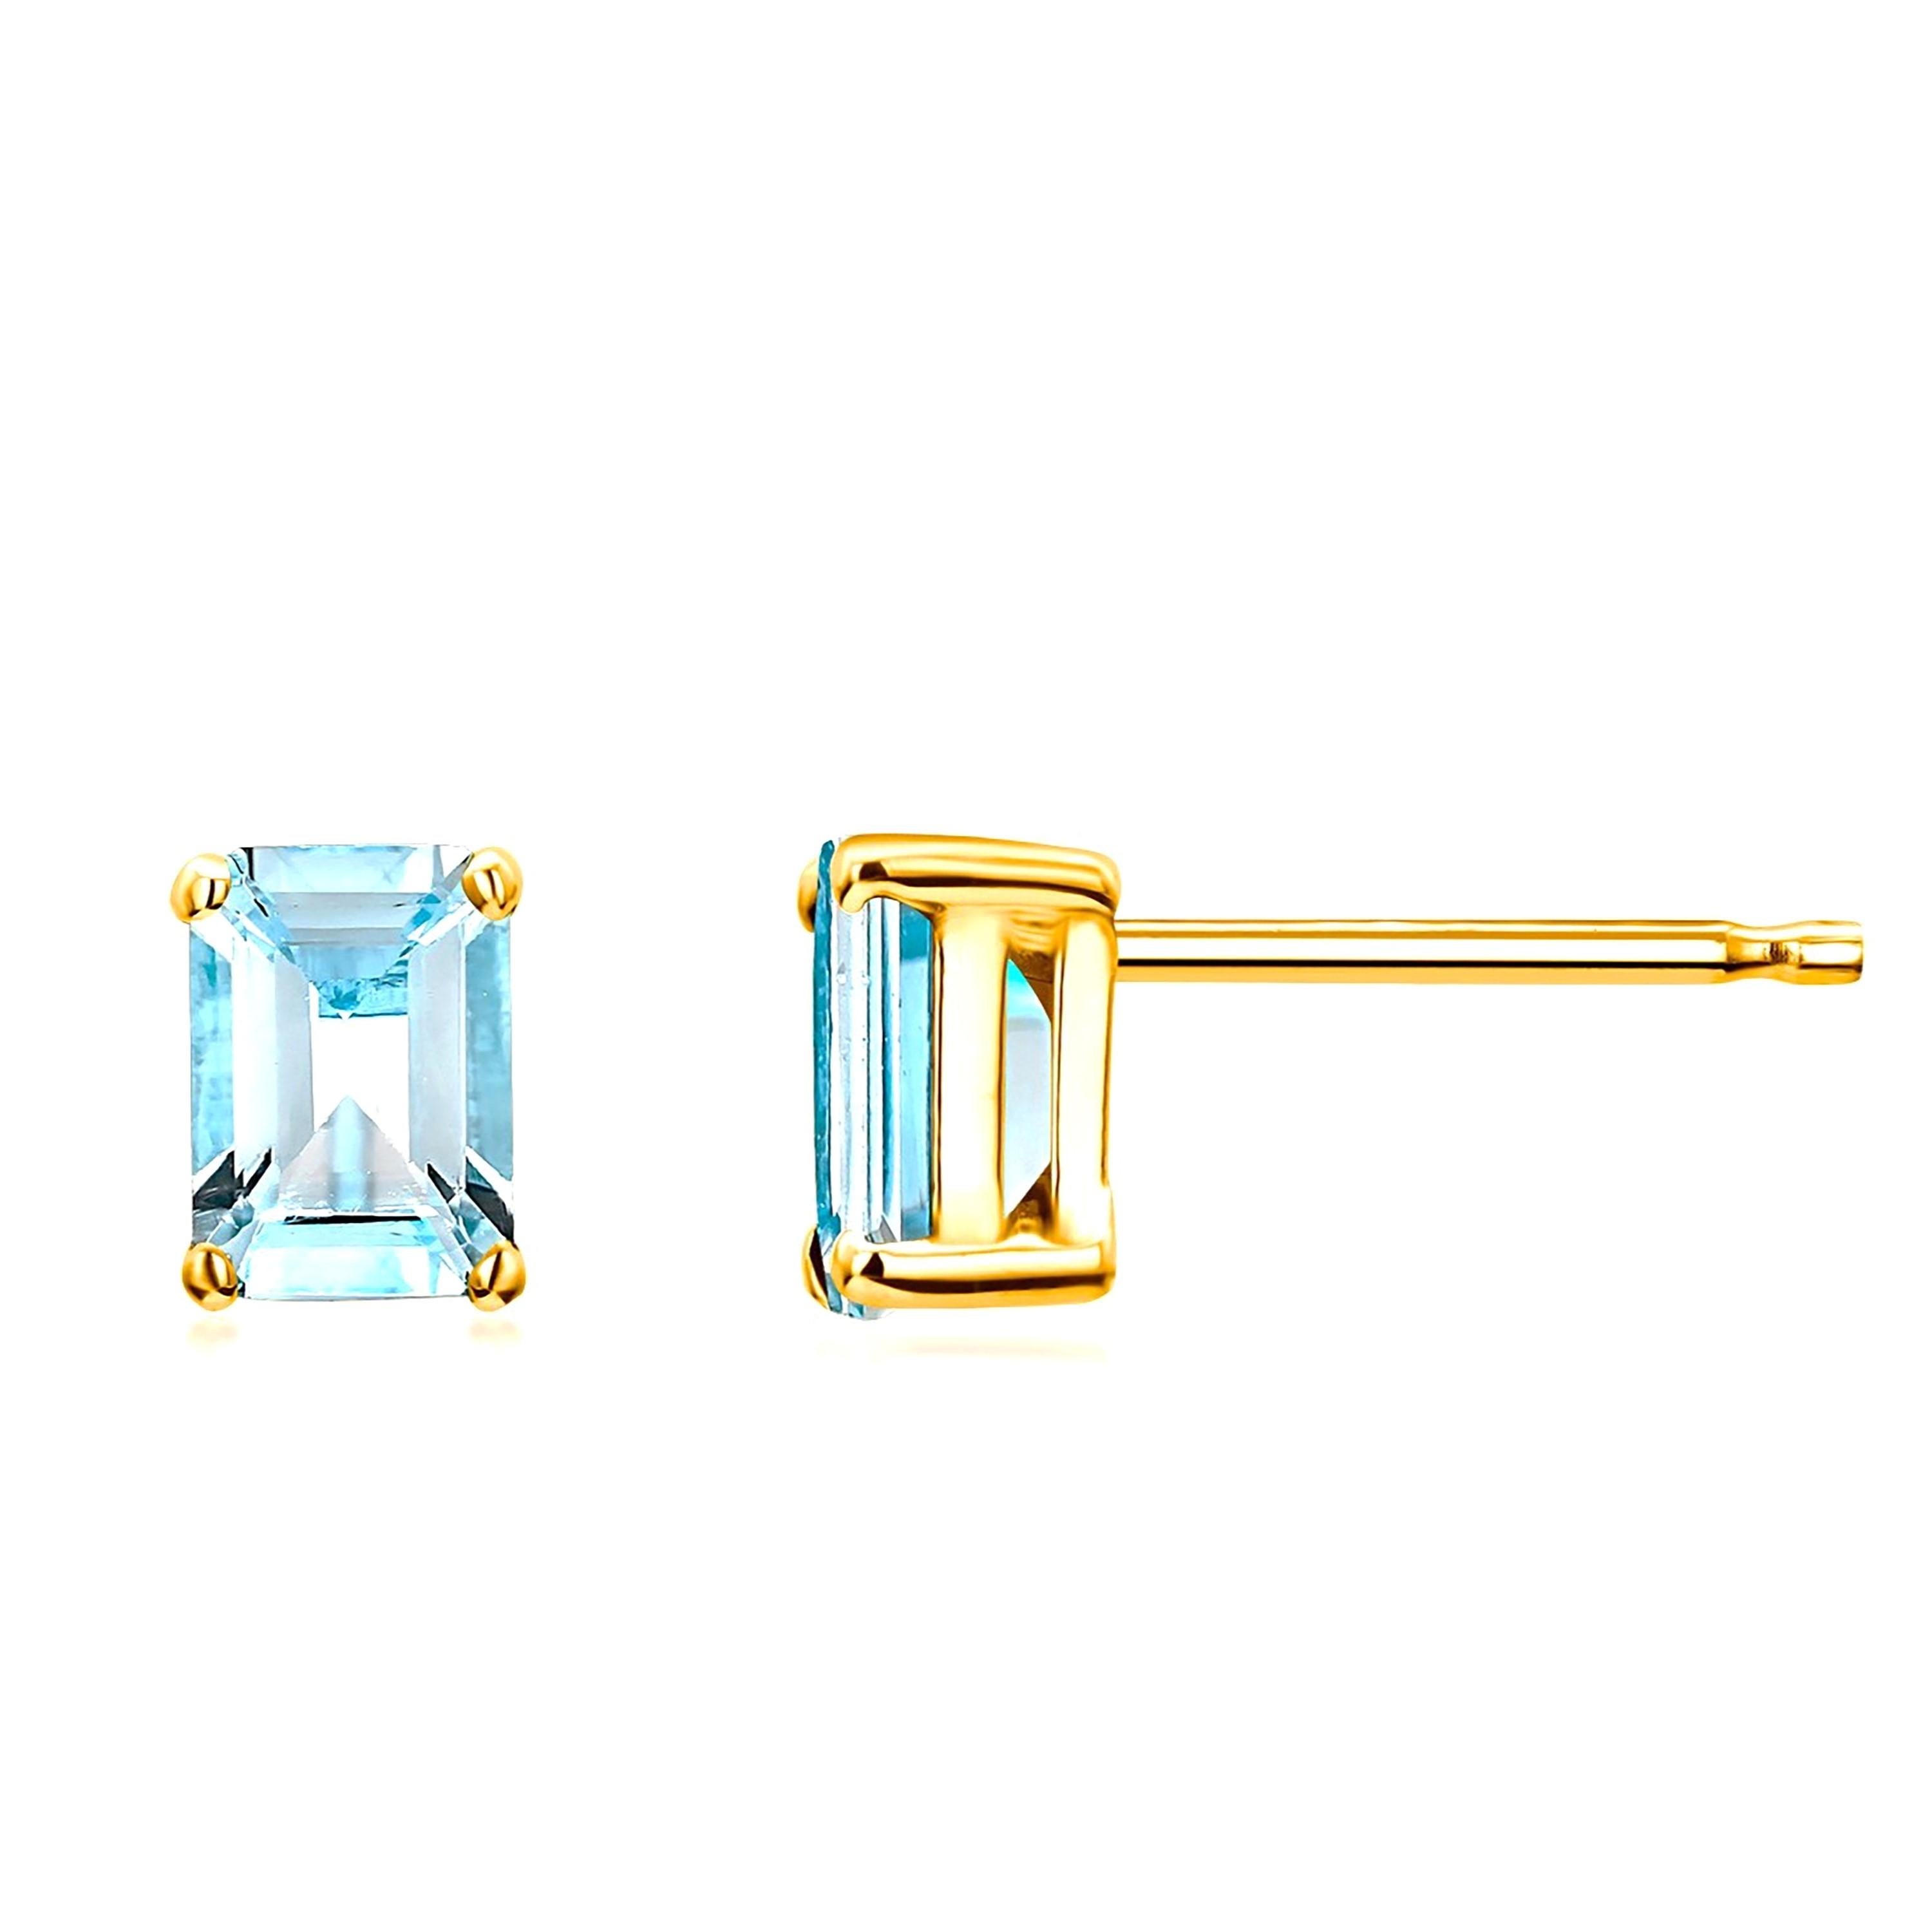 Emerald Shaped Aquamarine Set in Yellow Gold Stud Earrings Weighing 1.60 Carats 1